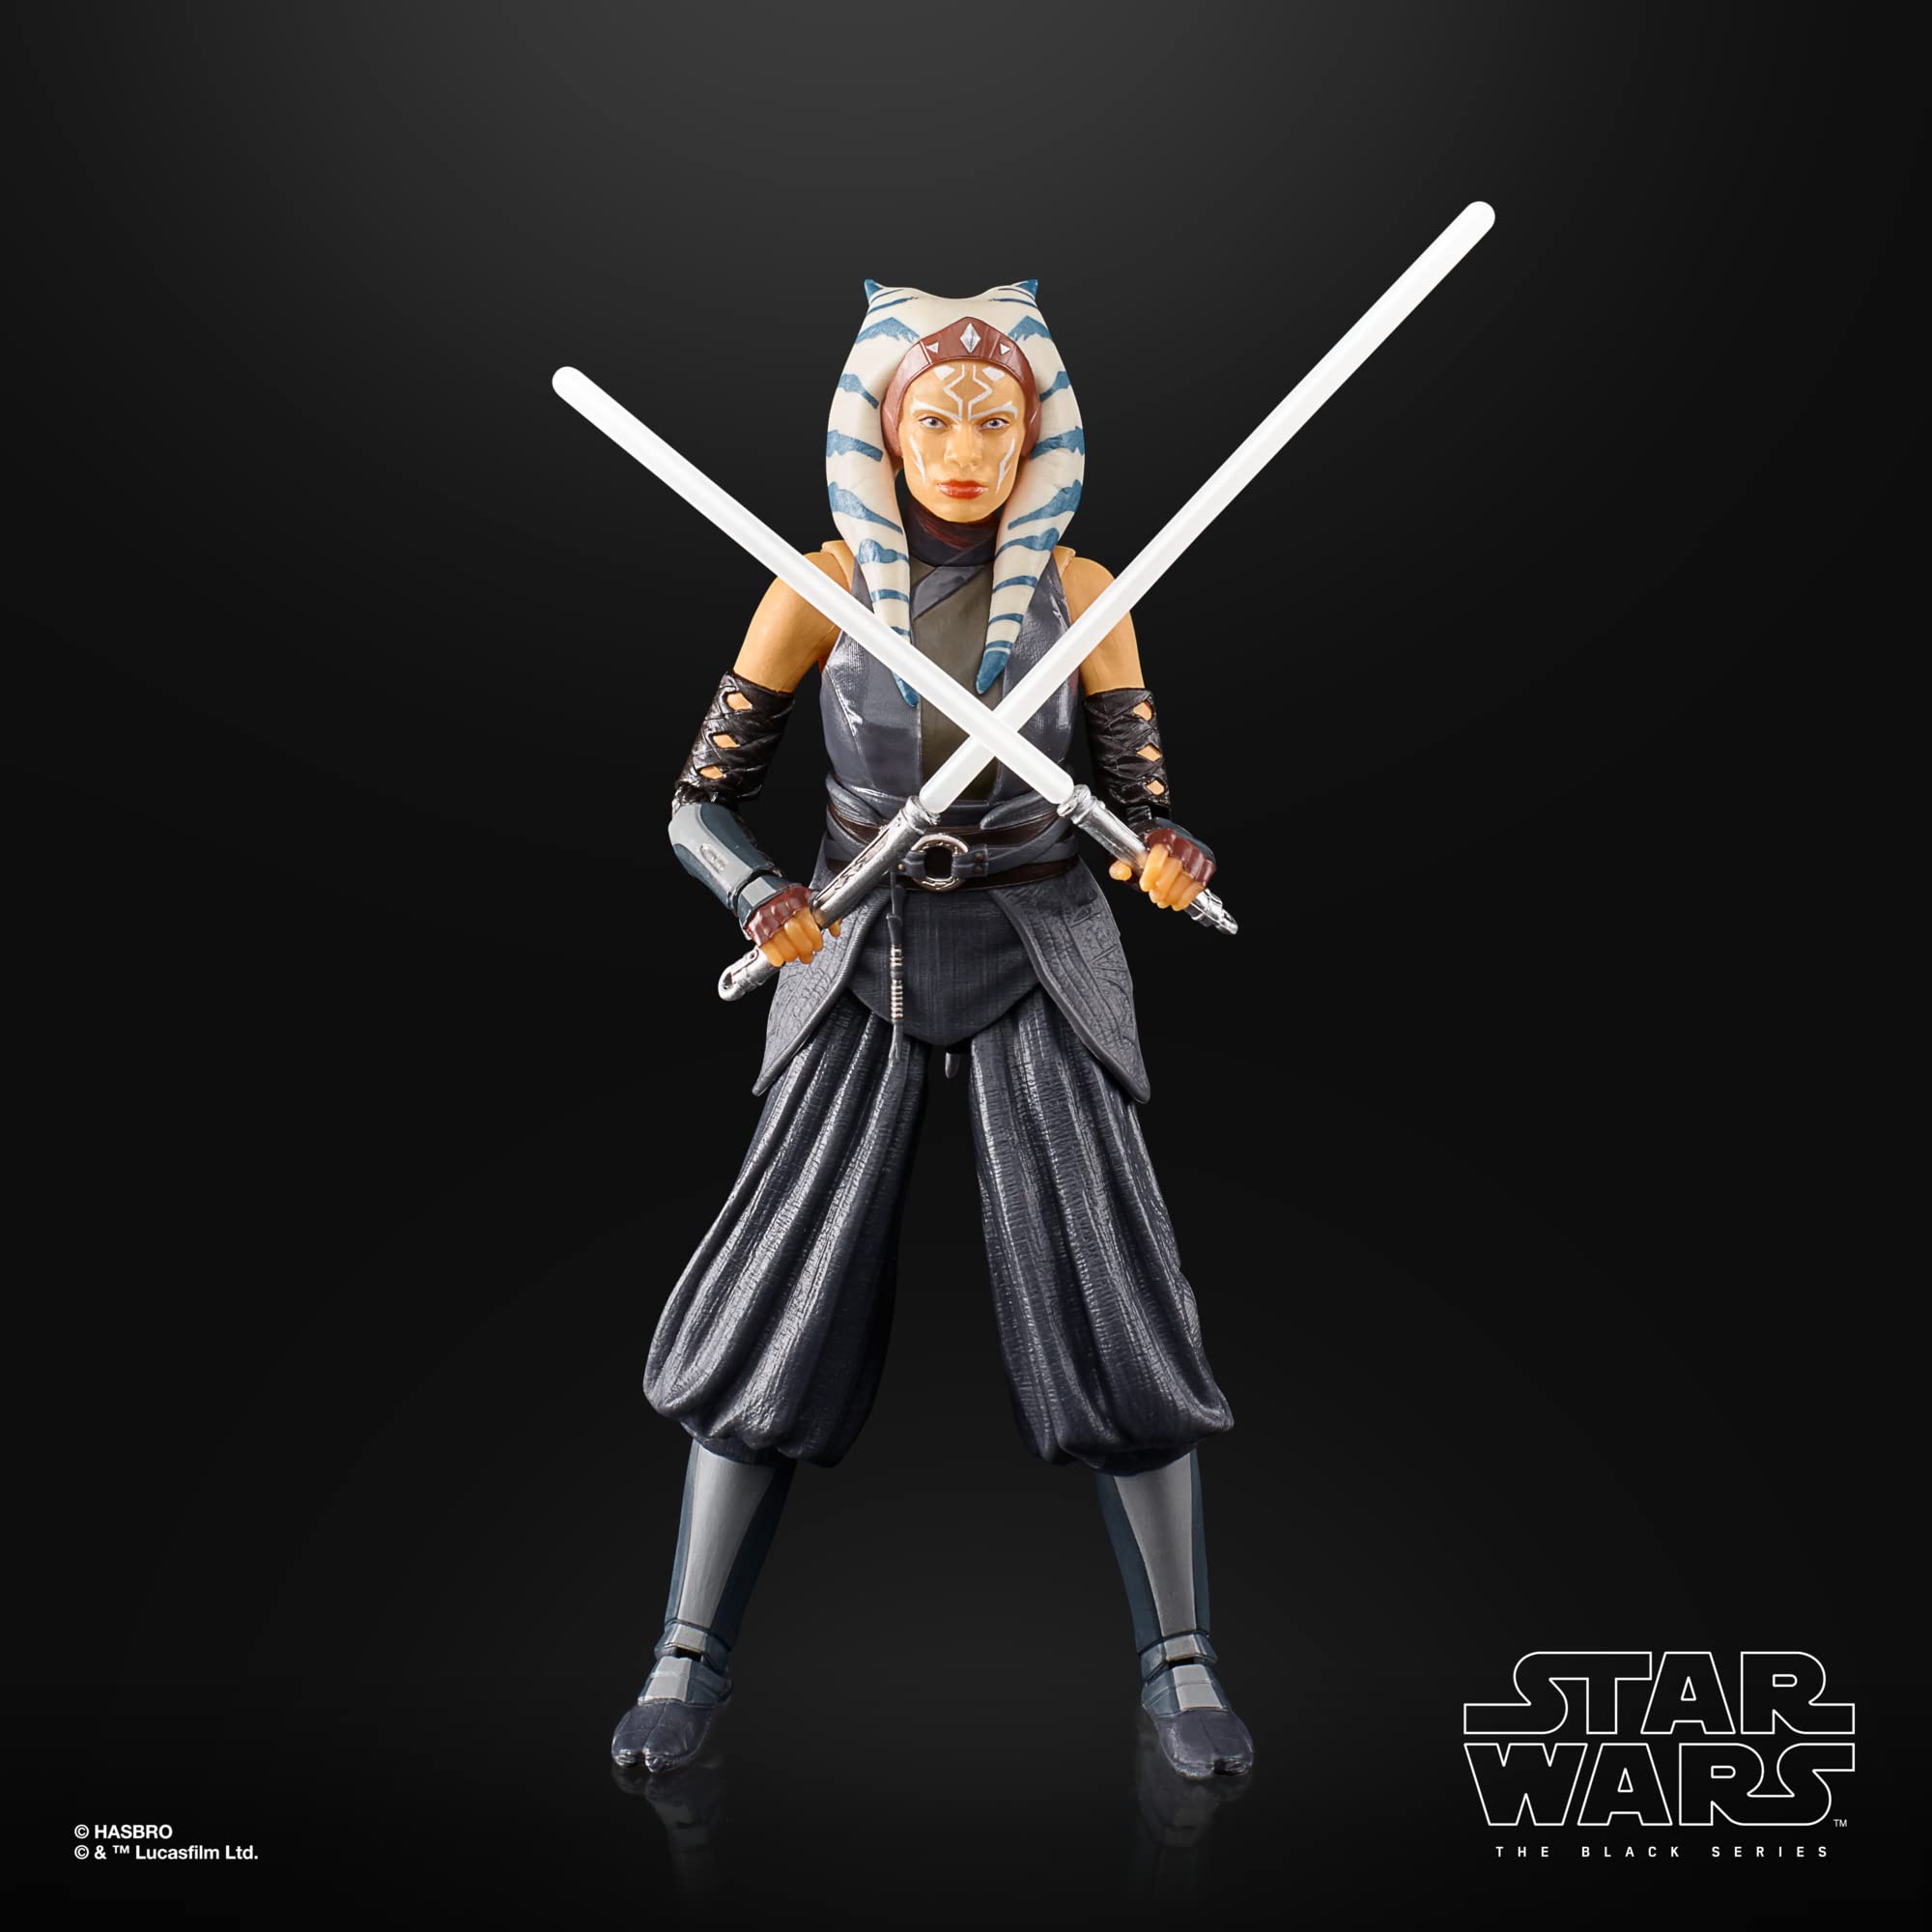 STAR WARS The Black Series Ahsoka Tano Toy 6-Inch-Scale The Mandalorian Collectible Action Figure, Toys for Kids Ages 4 and Up